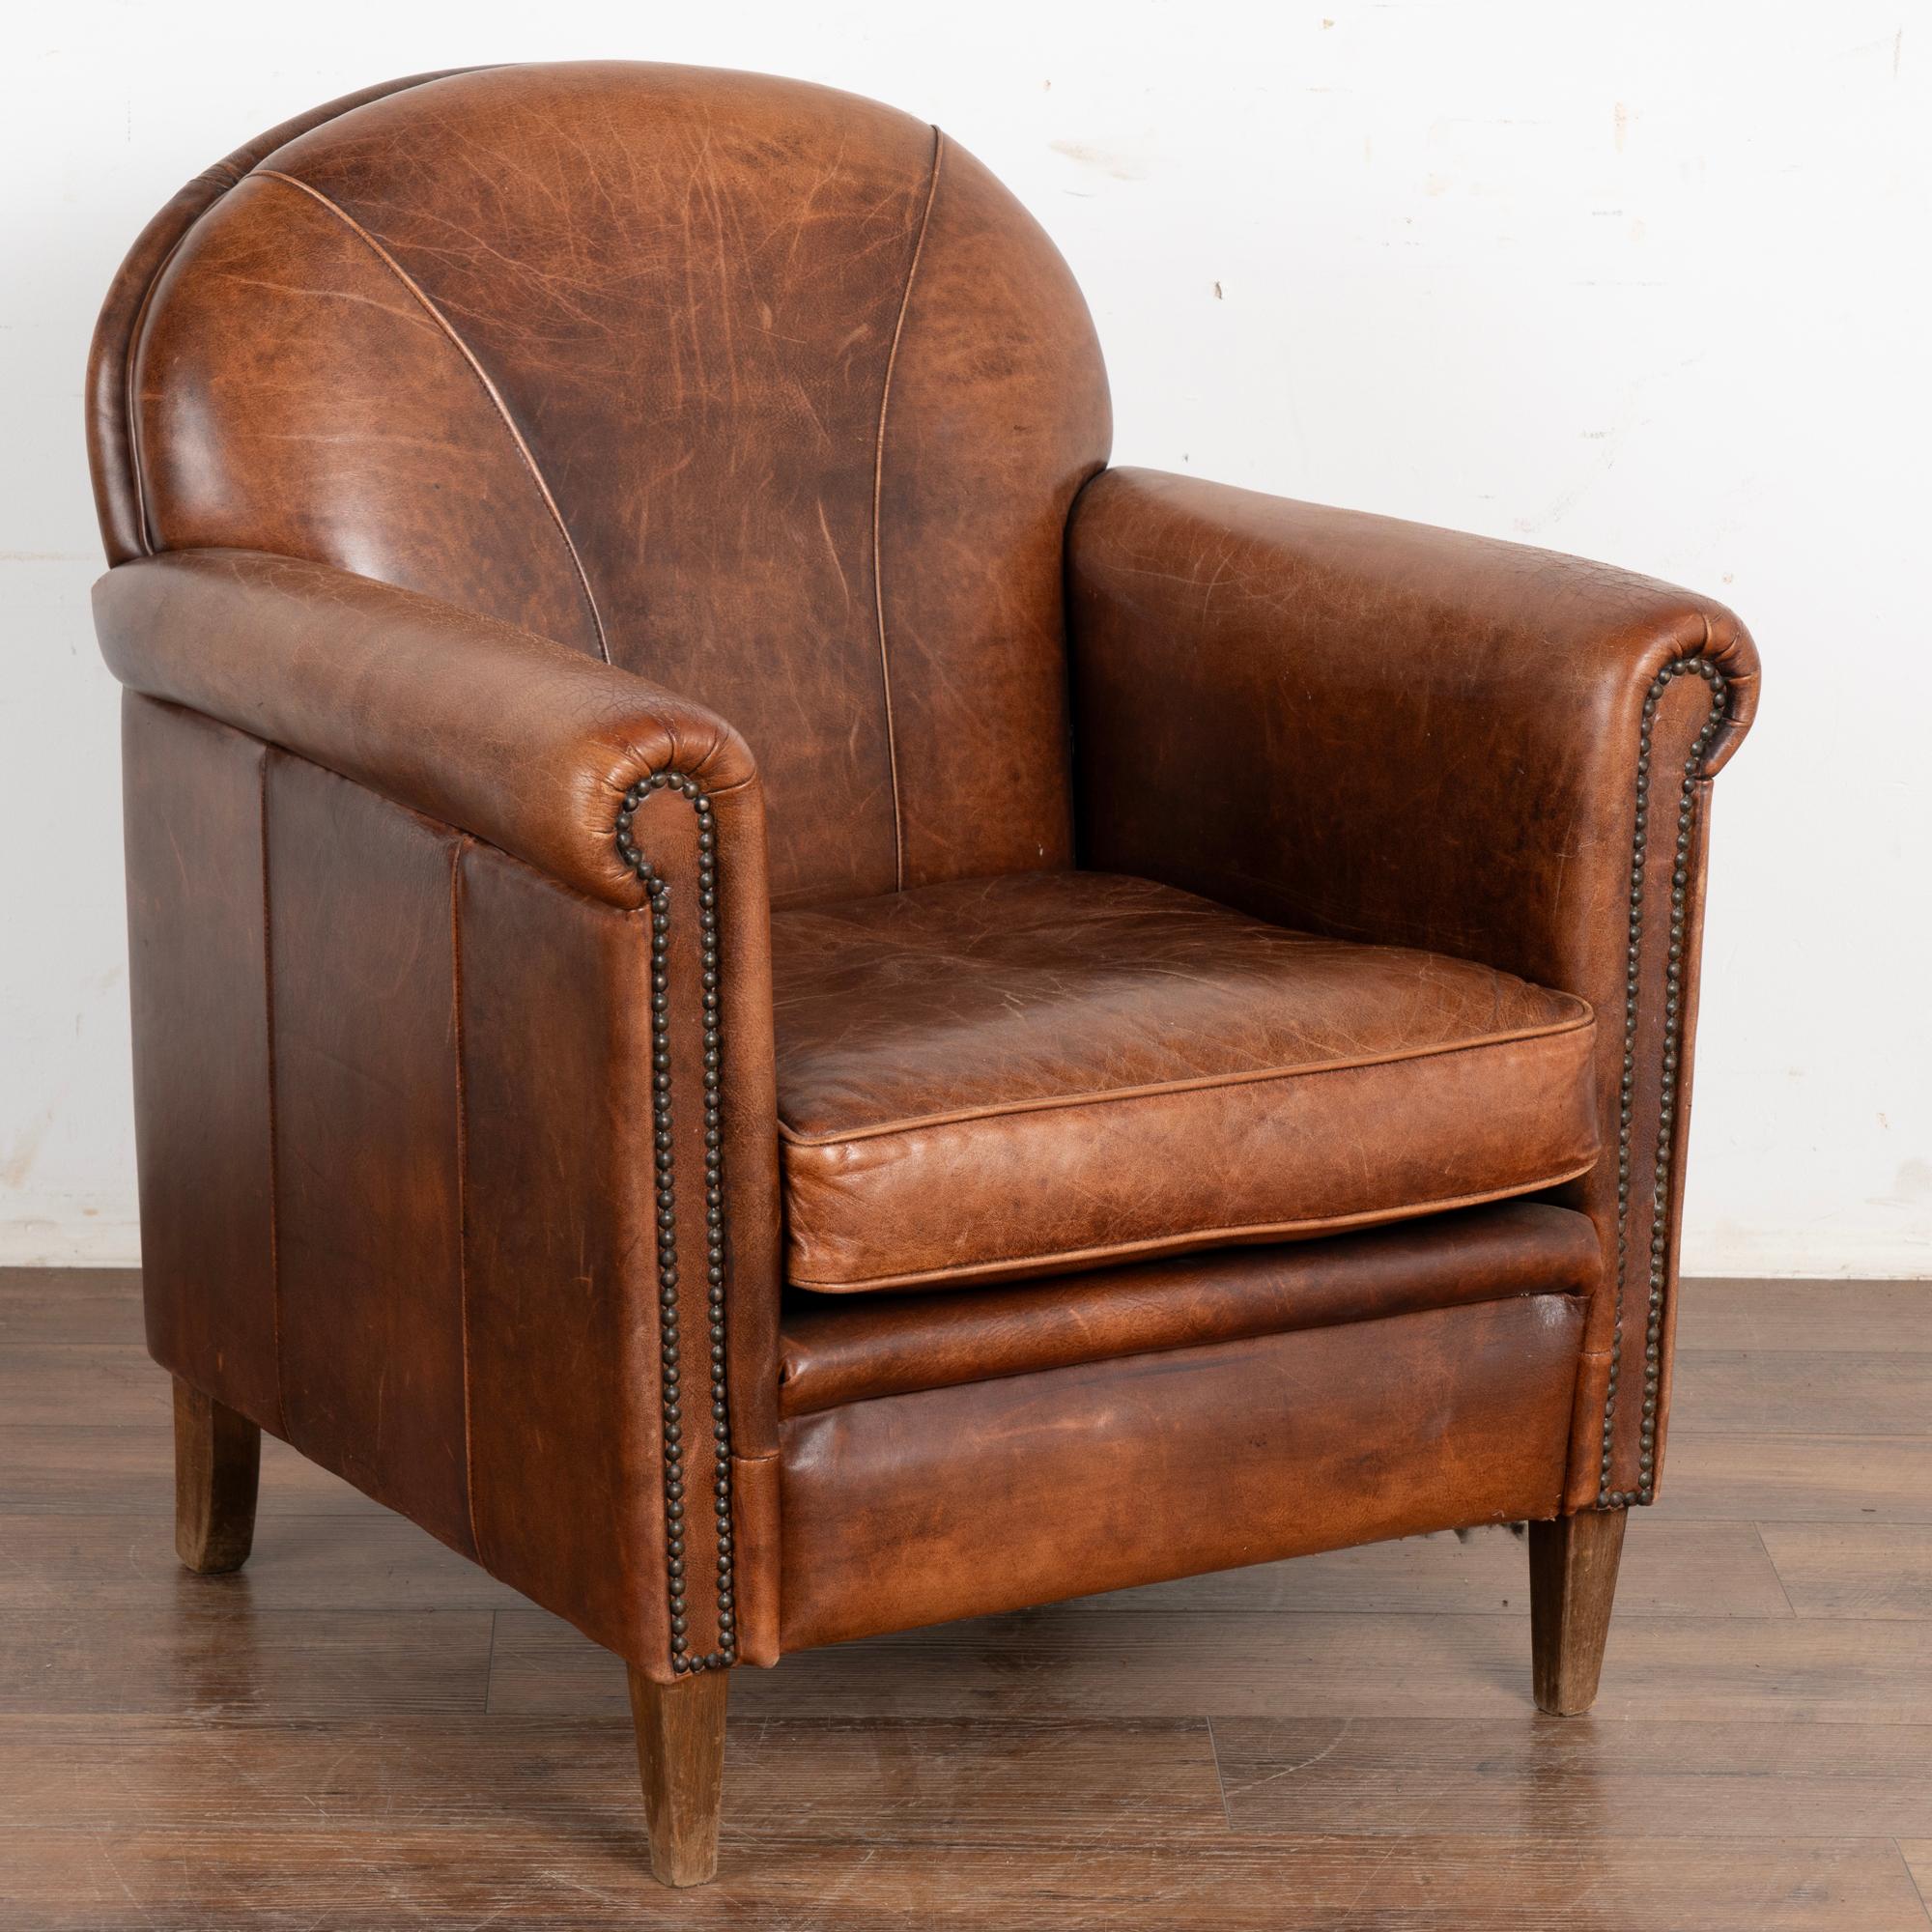 Vintage brown leather club arm chair with hard wood legs; seam details add visually to back and sides.
Upholstered in vintage sheep's leather with rich patina, rolled arms and nail head trim.
Sold in original vintage condition; solid/stable and sits